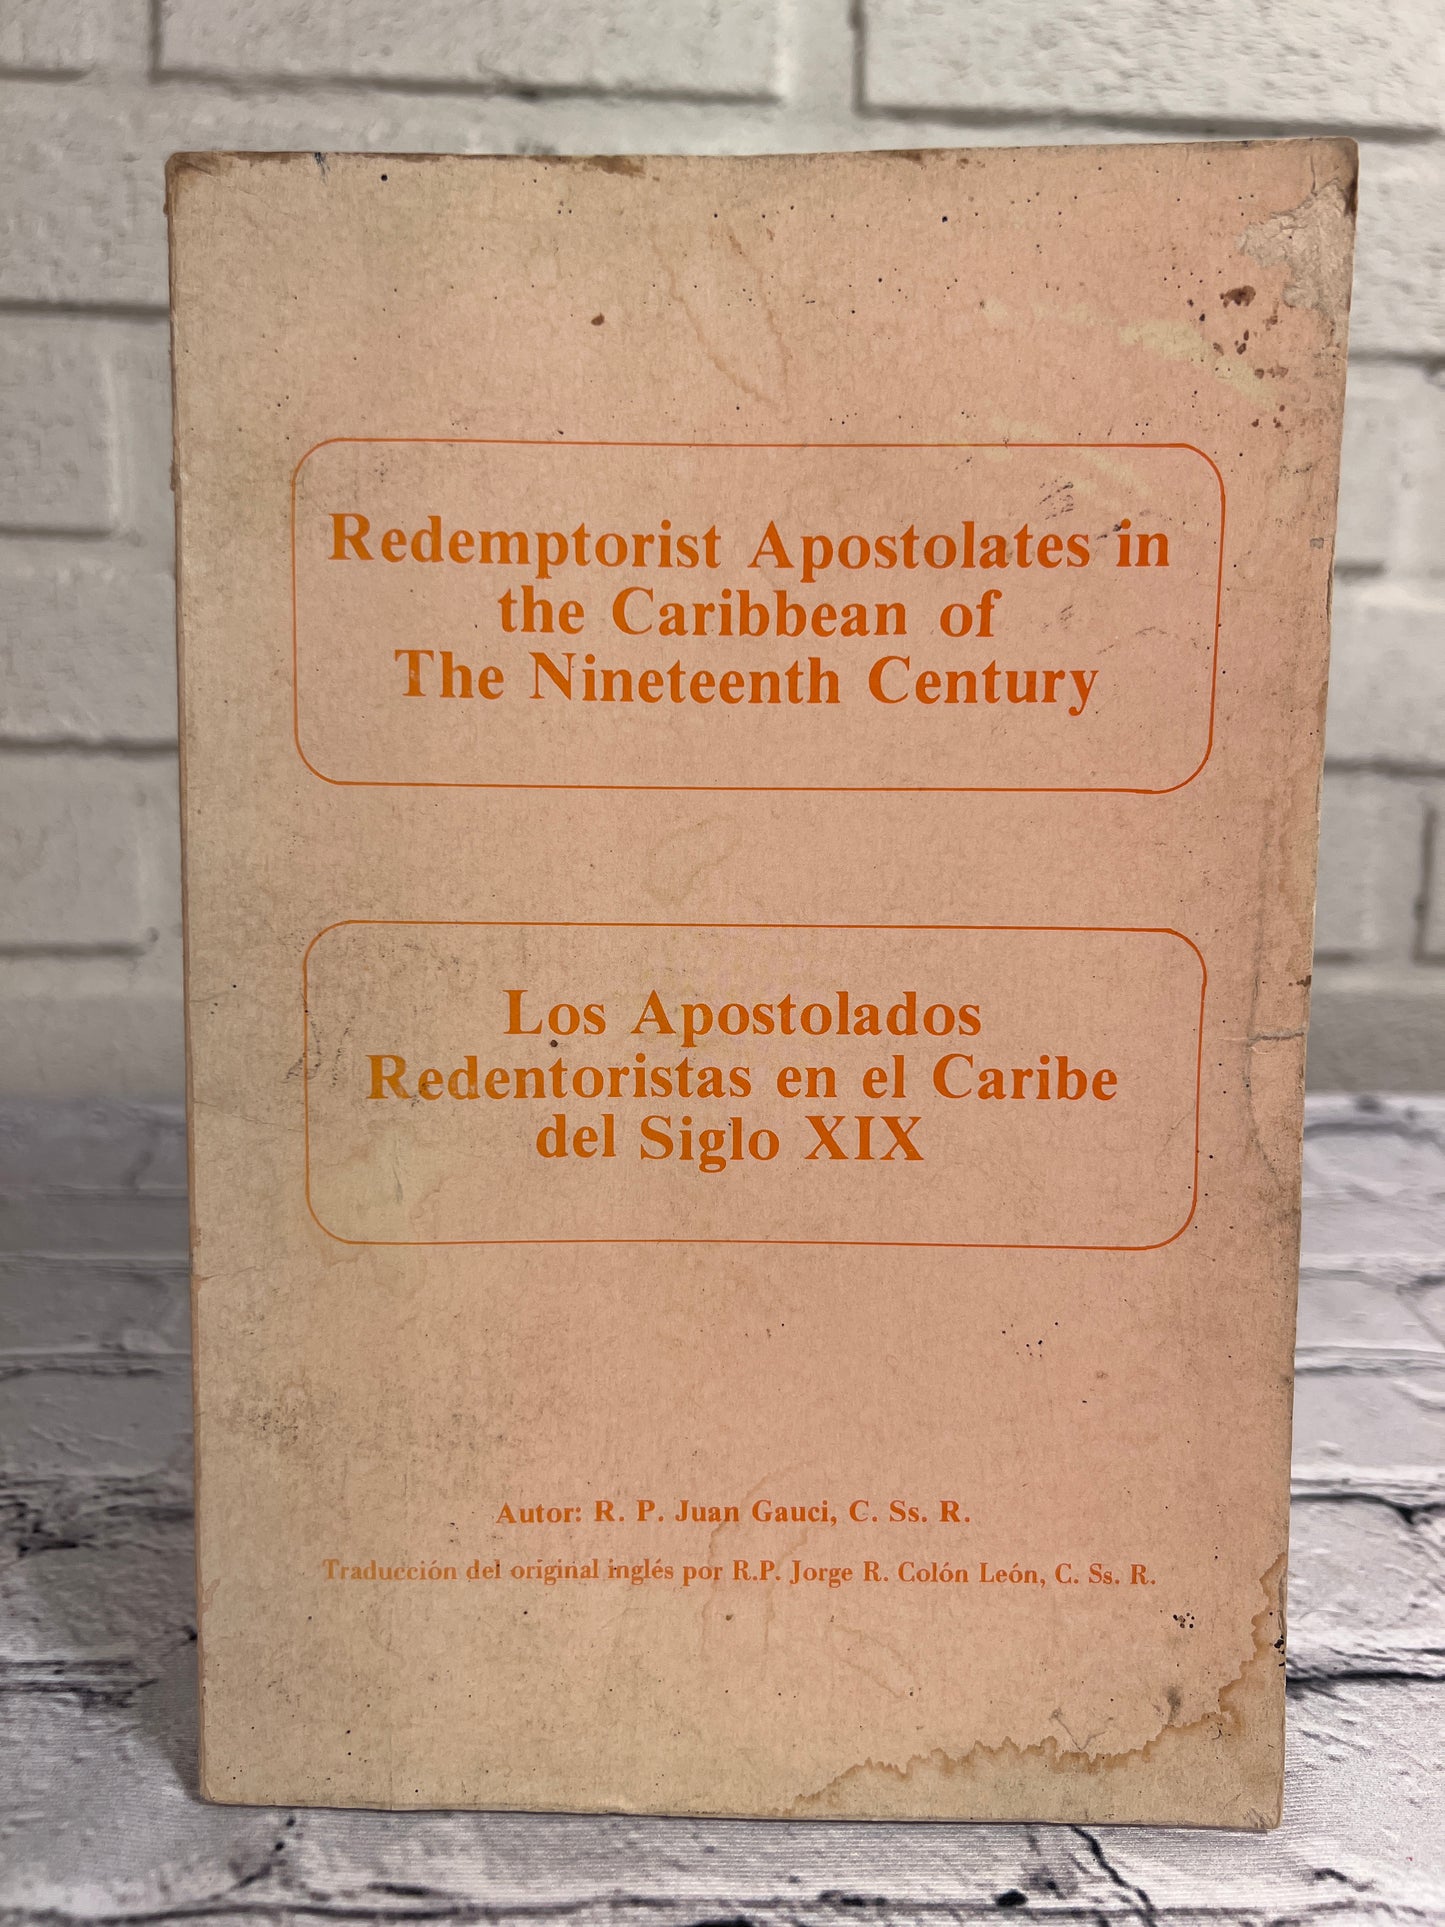 Redempotorist Aposolates in the Caribbean of the Nineteenth Century by R. P. Juan Gauci